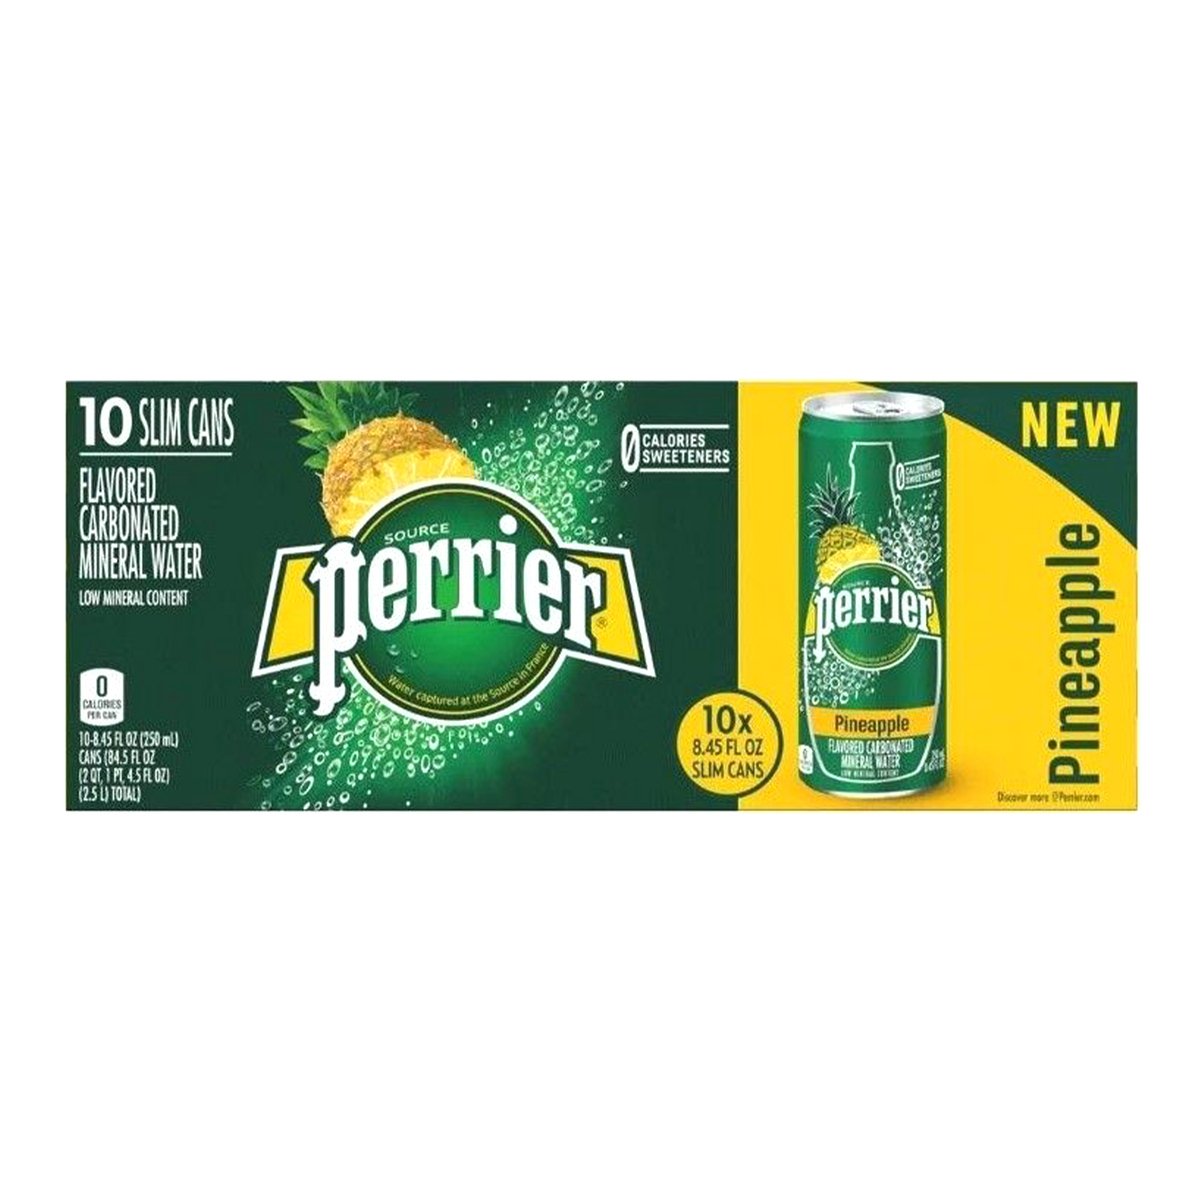 Perrier Sparkling Pineapple Flavored Natural Mineral Water 10 x 250 ml